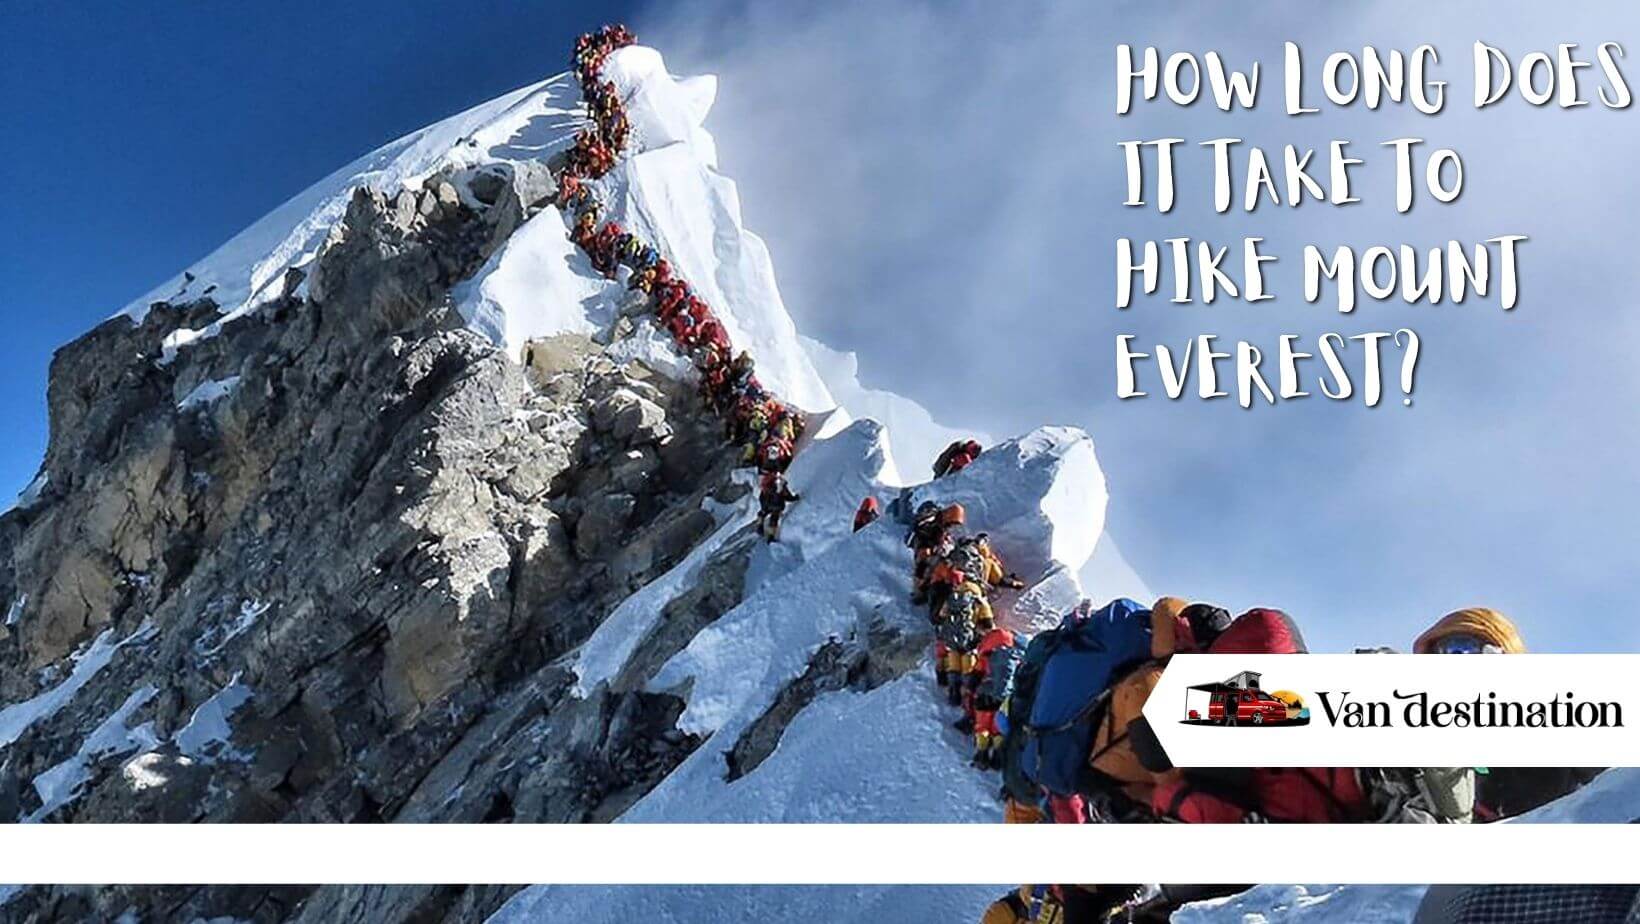 How Long Does it Take To Hike Mount Everest